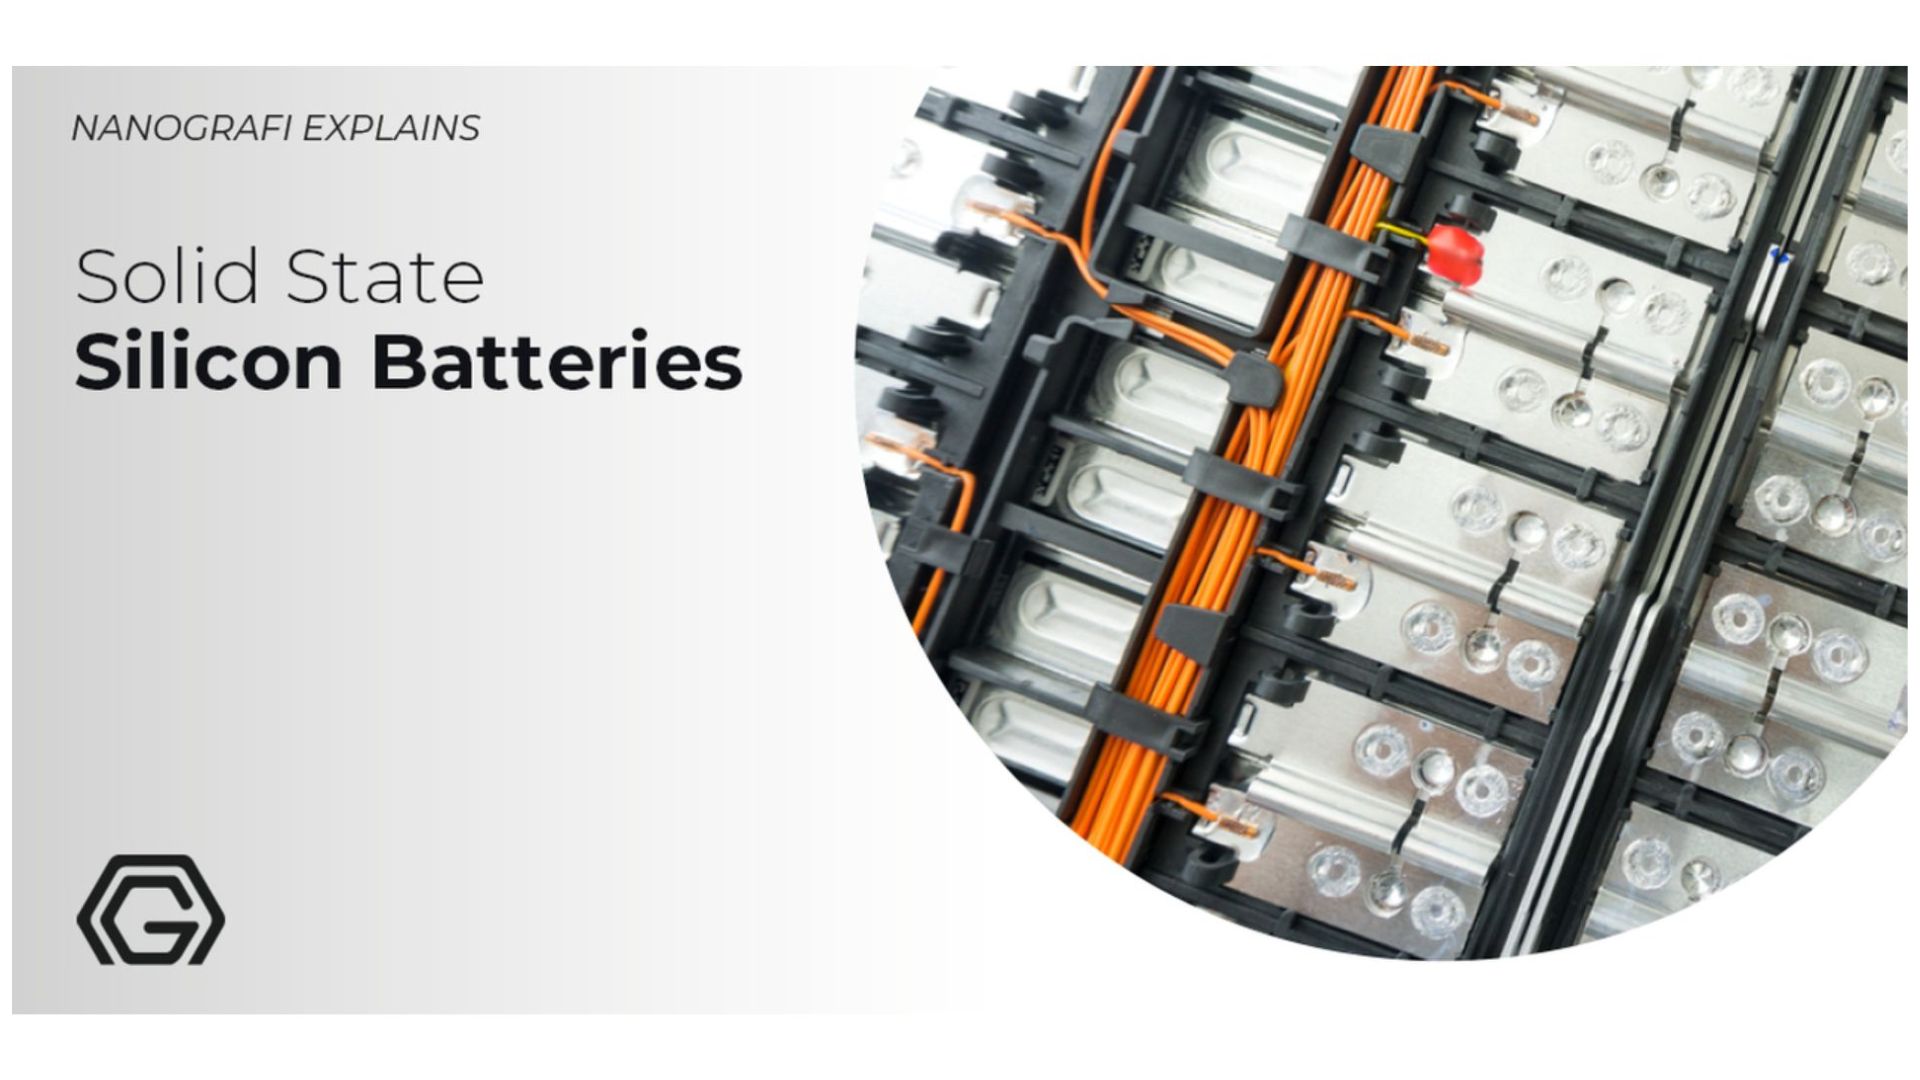 Solid state silicon batteries